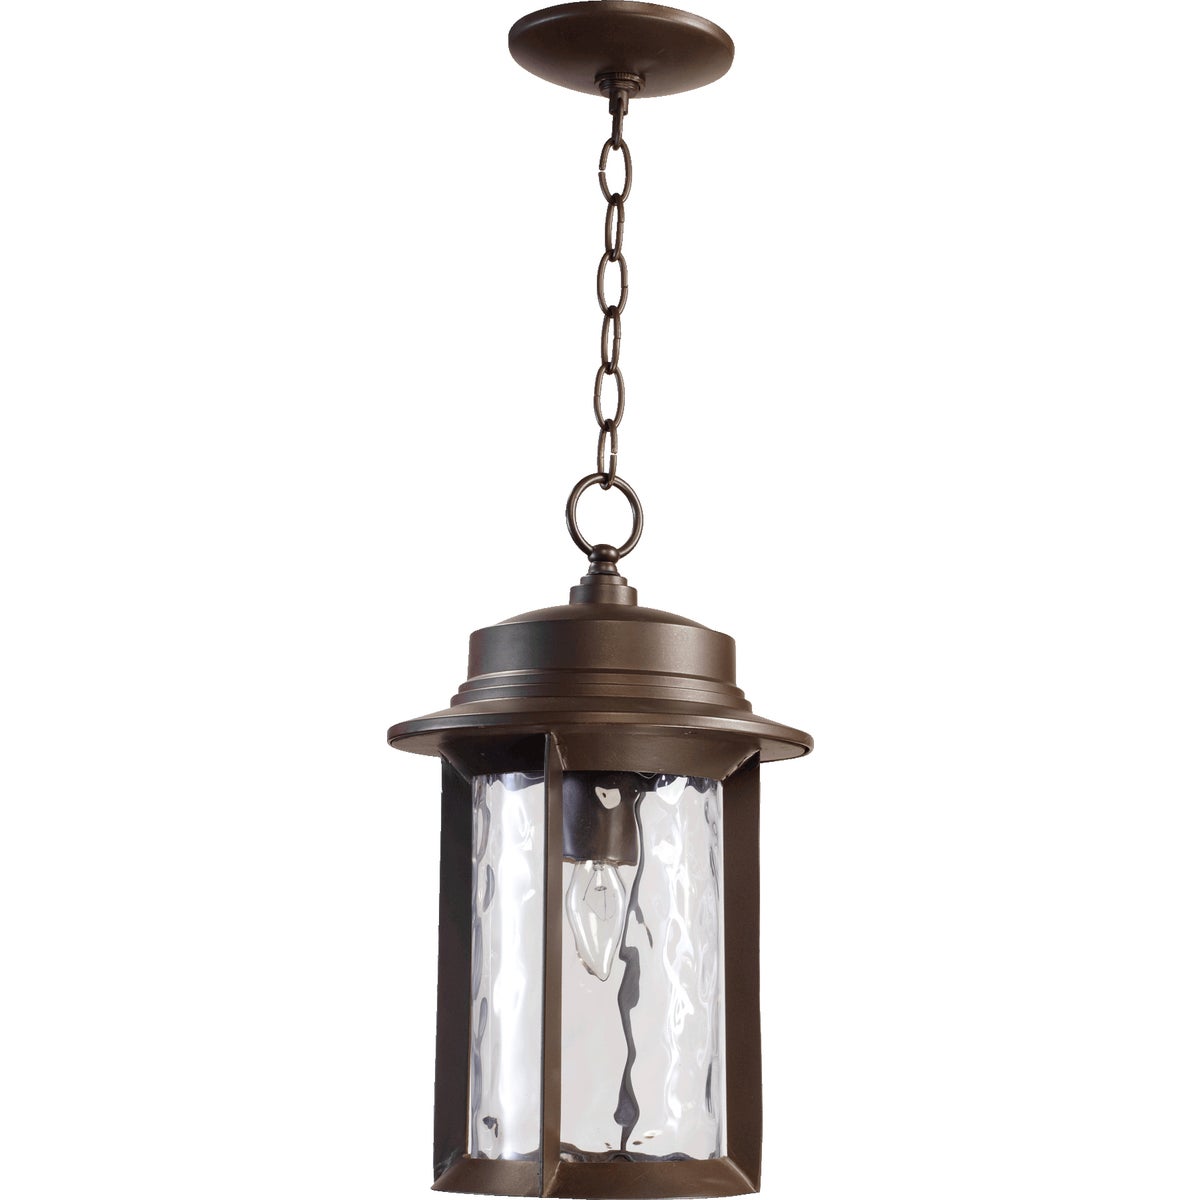 Mid Century Modern Outdoor Hanging Light with hammered glass panes, clean-lined drum silhouette, and durable metal construction. Fits single dimmable 100W bulb (not included). UL Listed for Wet Locations. Dimensions: 9.5"W x 15.75"H.